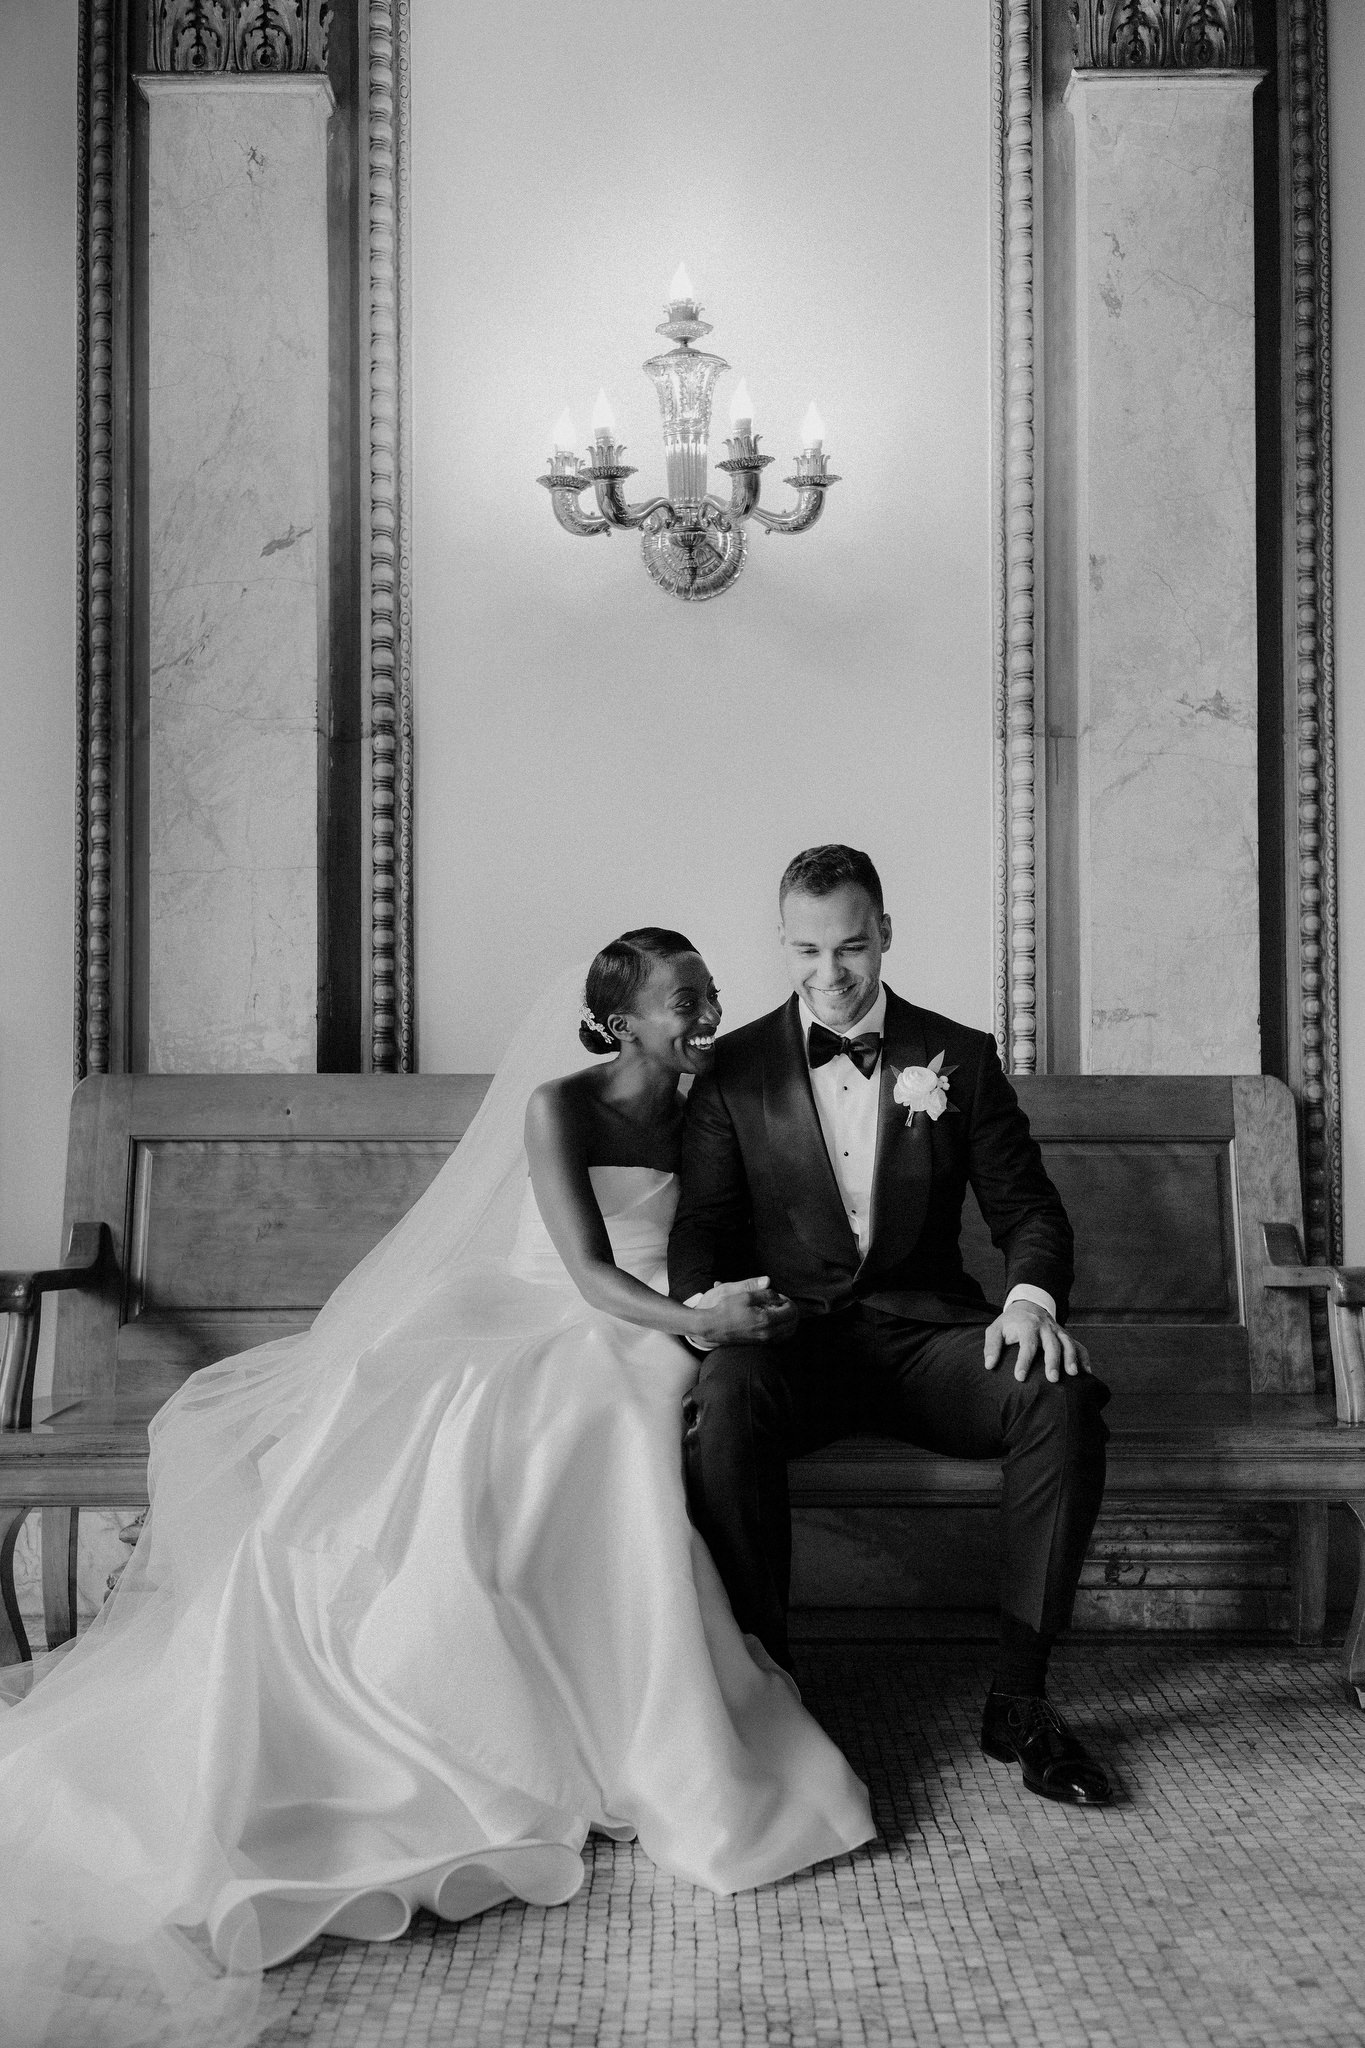 Couple sitting together on a bench in wedding dress and suit